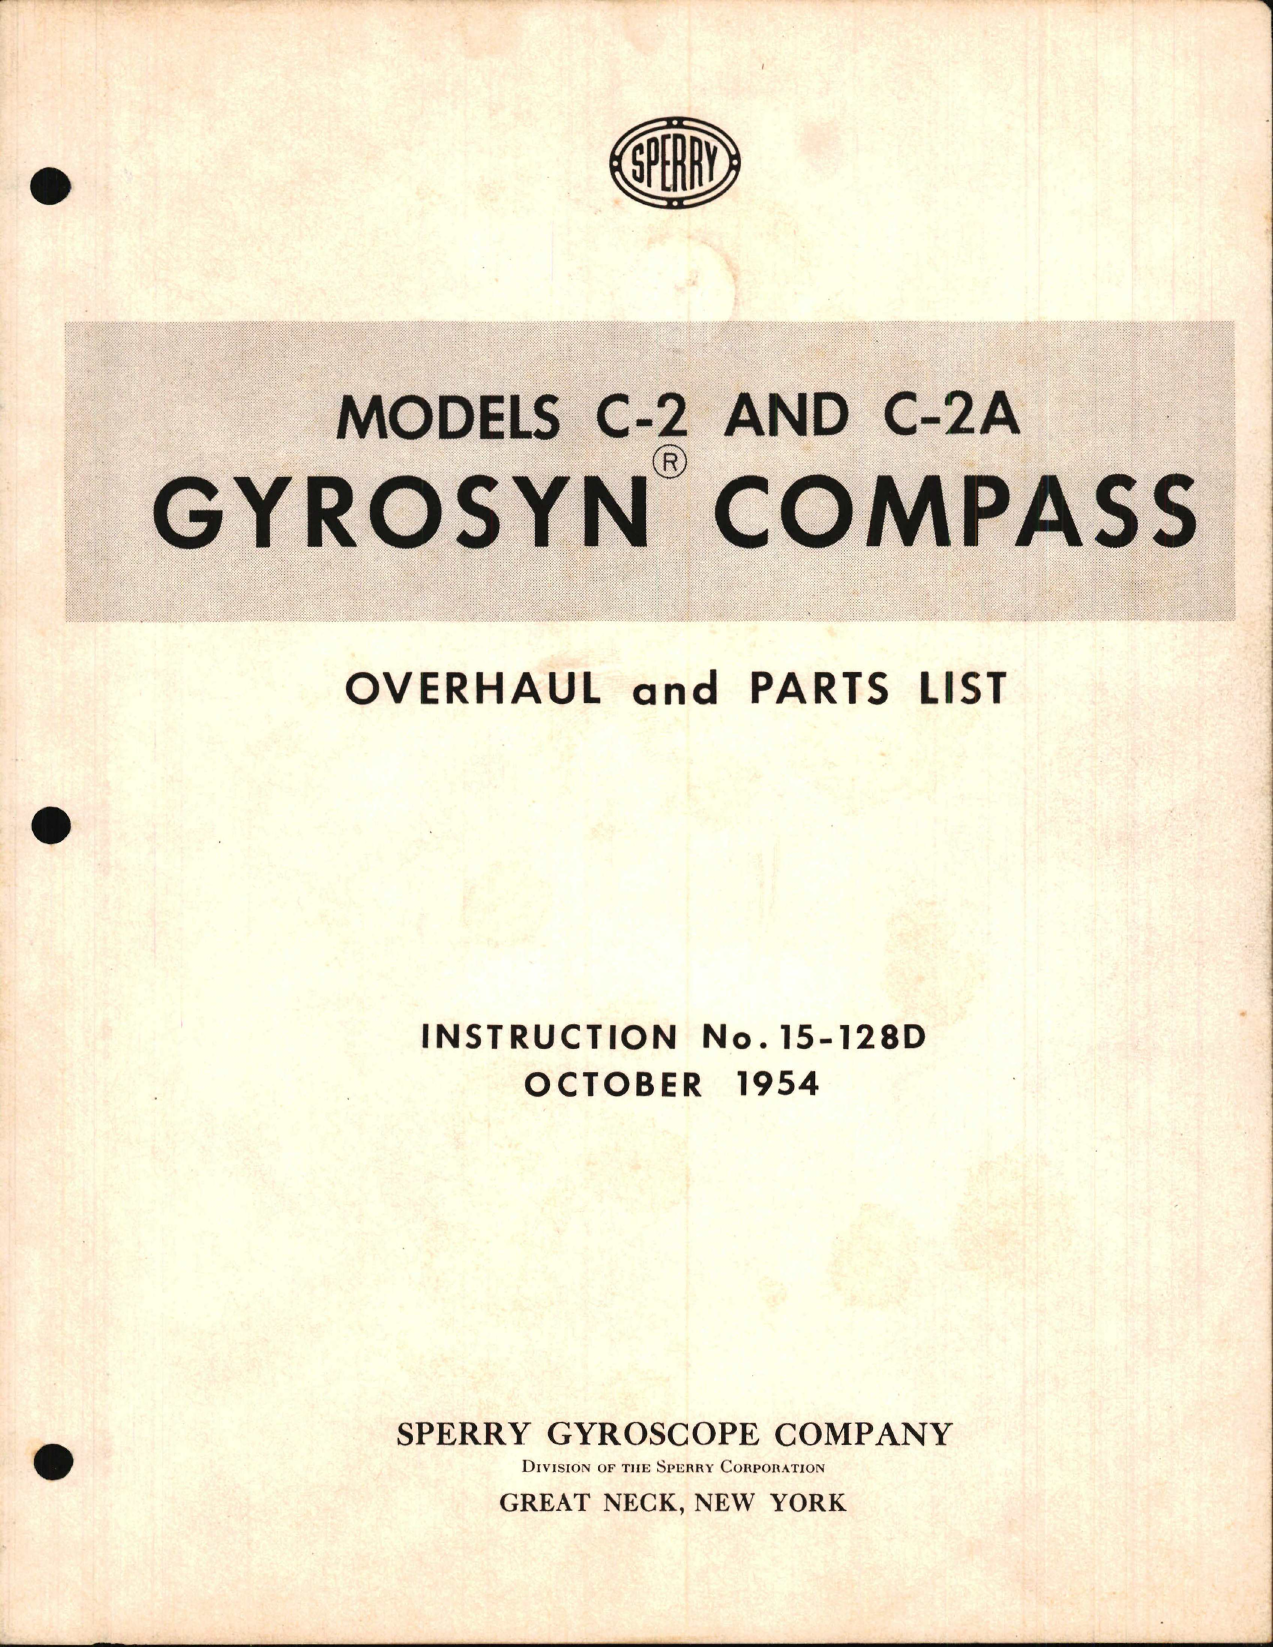 Sample page 1 from AirCorps Library document: Overhaul and Parts List for Gyrosyn Compass Models C-2 and C-2A